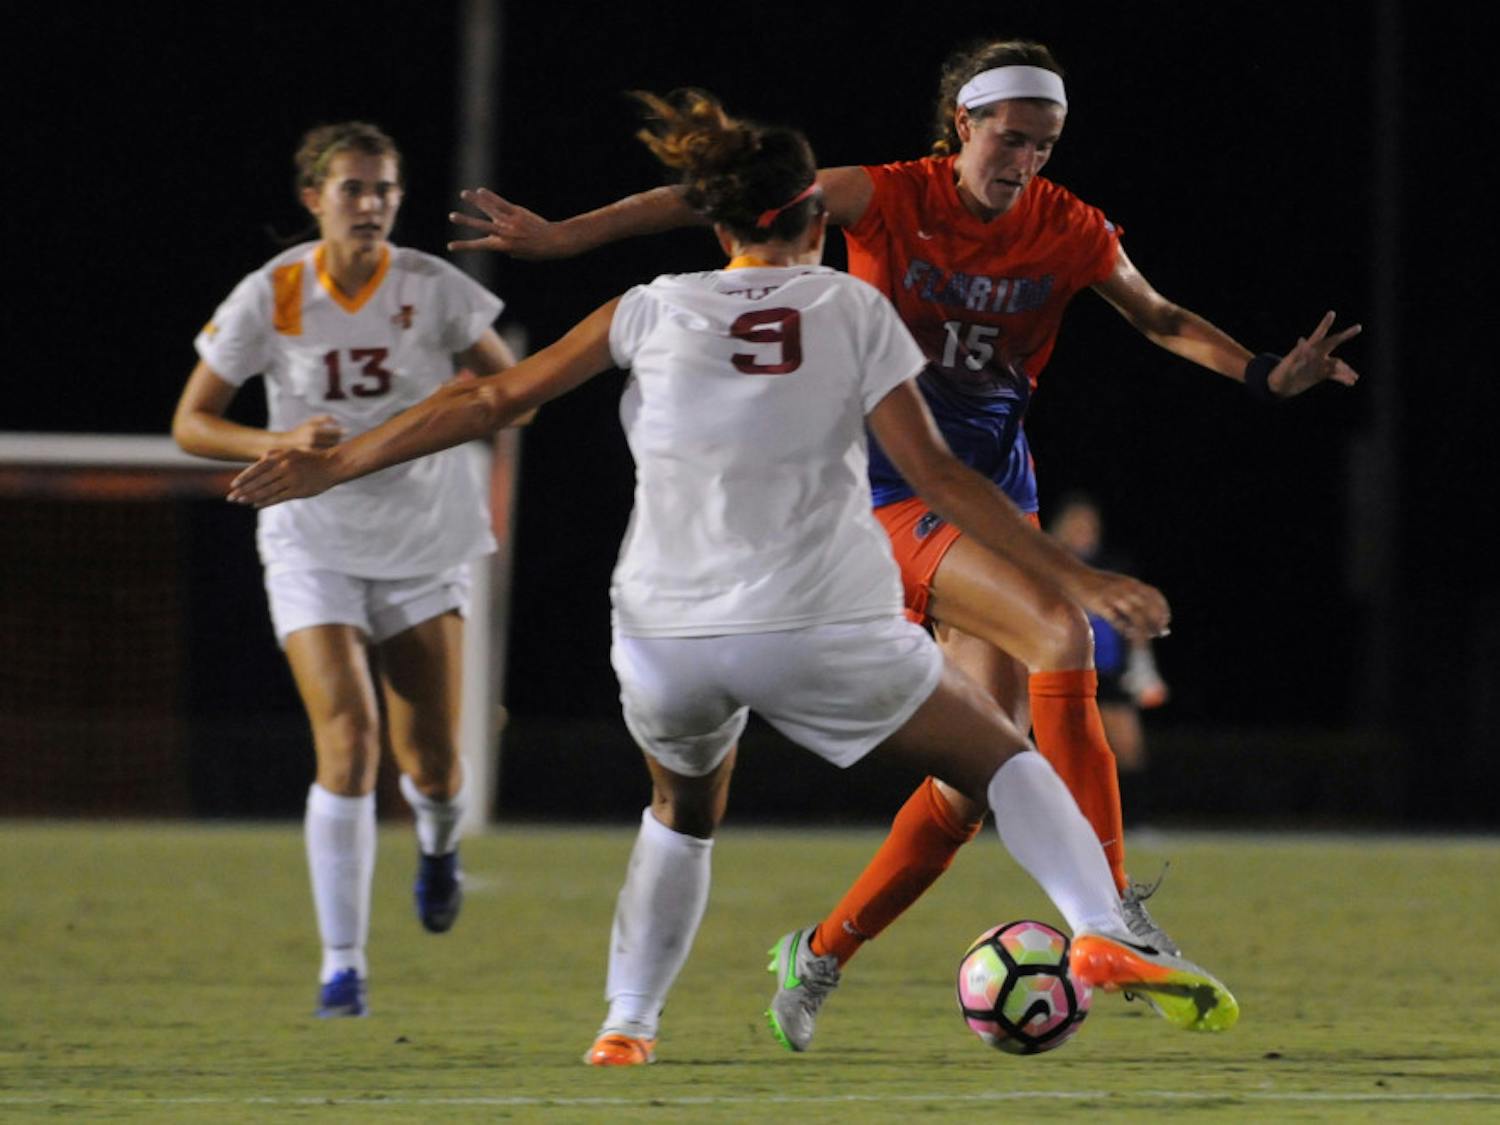 UF midfielder Sarah Troccoli dribbles past an Iowa State defender during Florida's 5-2 win against Iowa State on Aug. 19, 2016, at James G. Pressly Stadium.